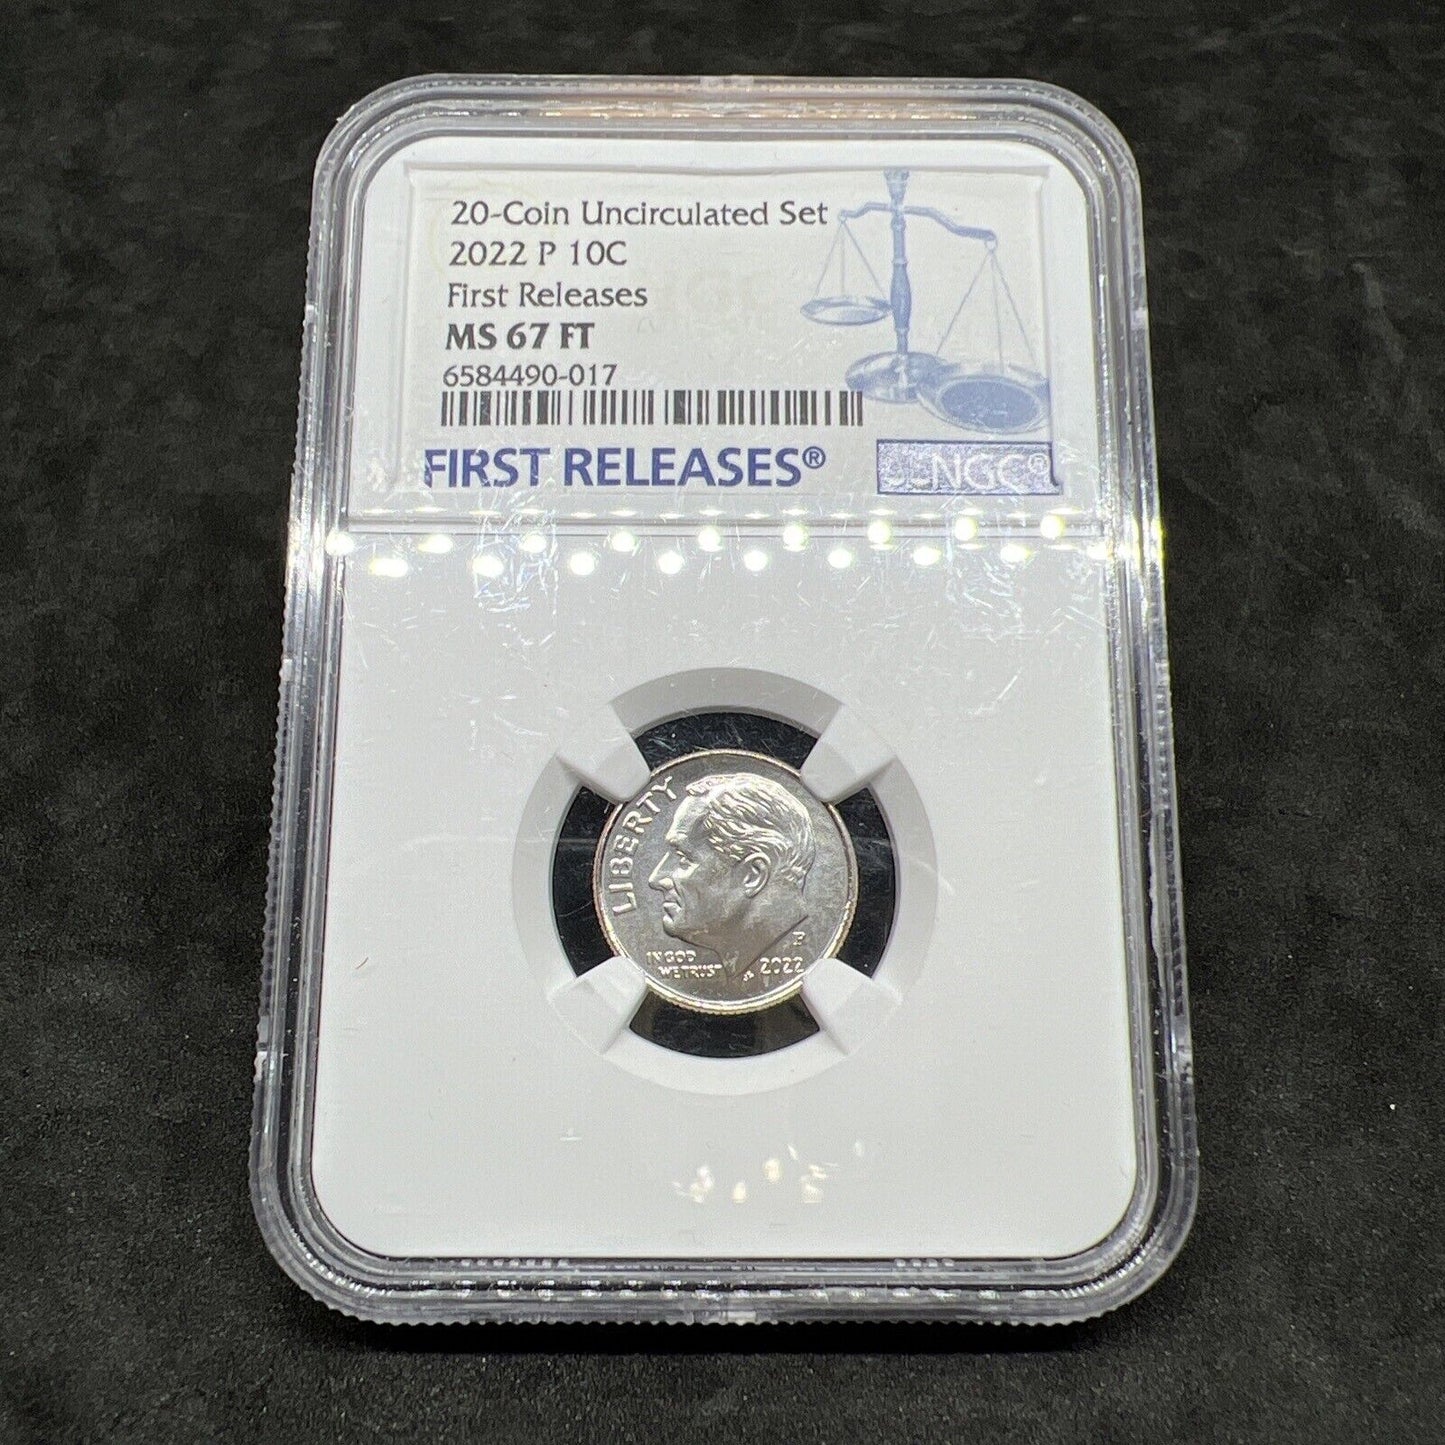 2022 P 10c MS67 FT Full Torch NGC Roosevelt From 20 Coin Mint Set First Releases